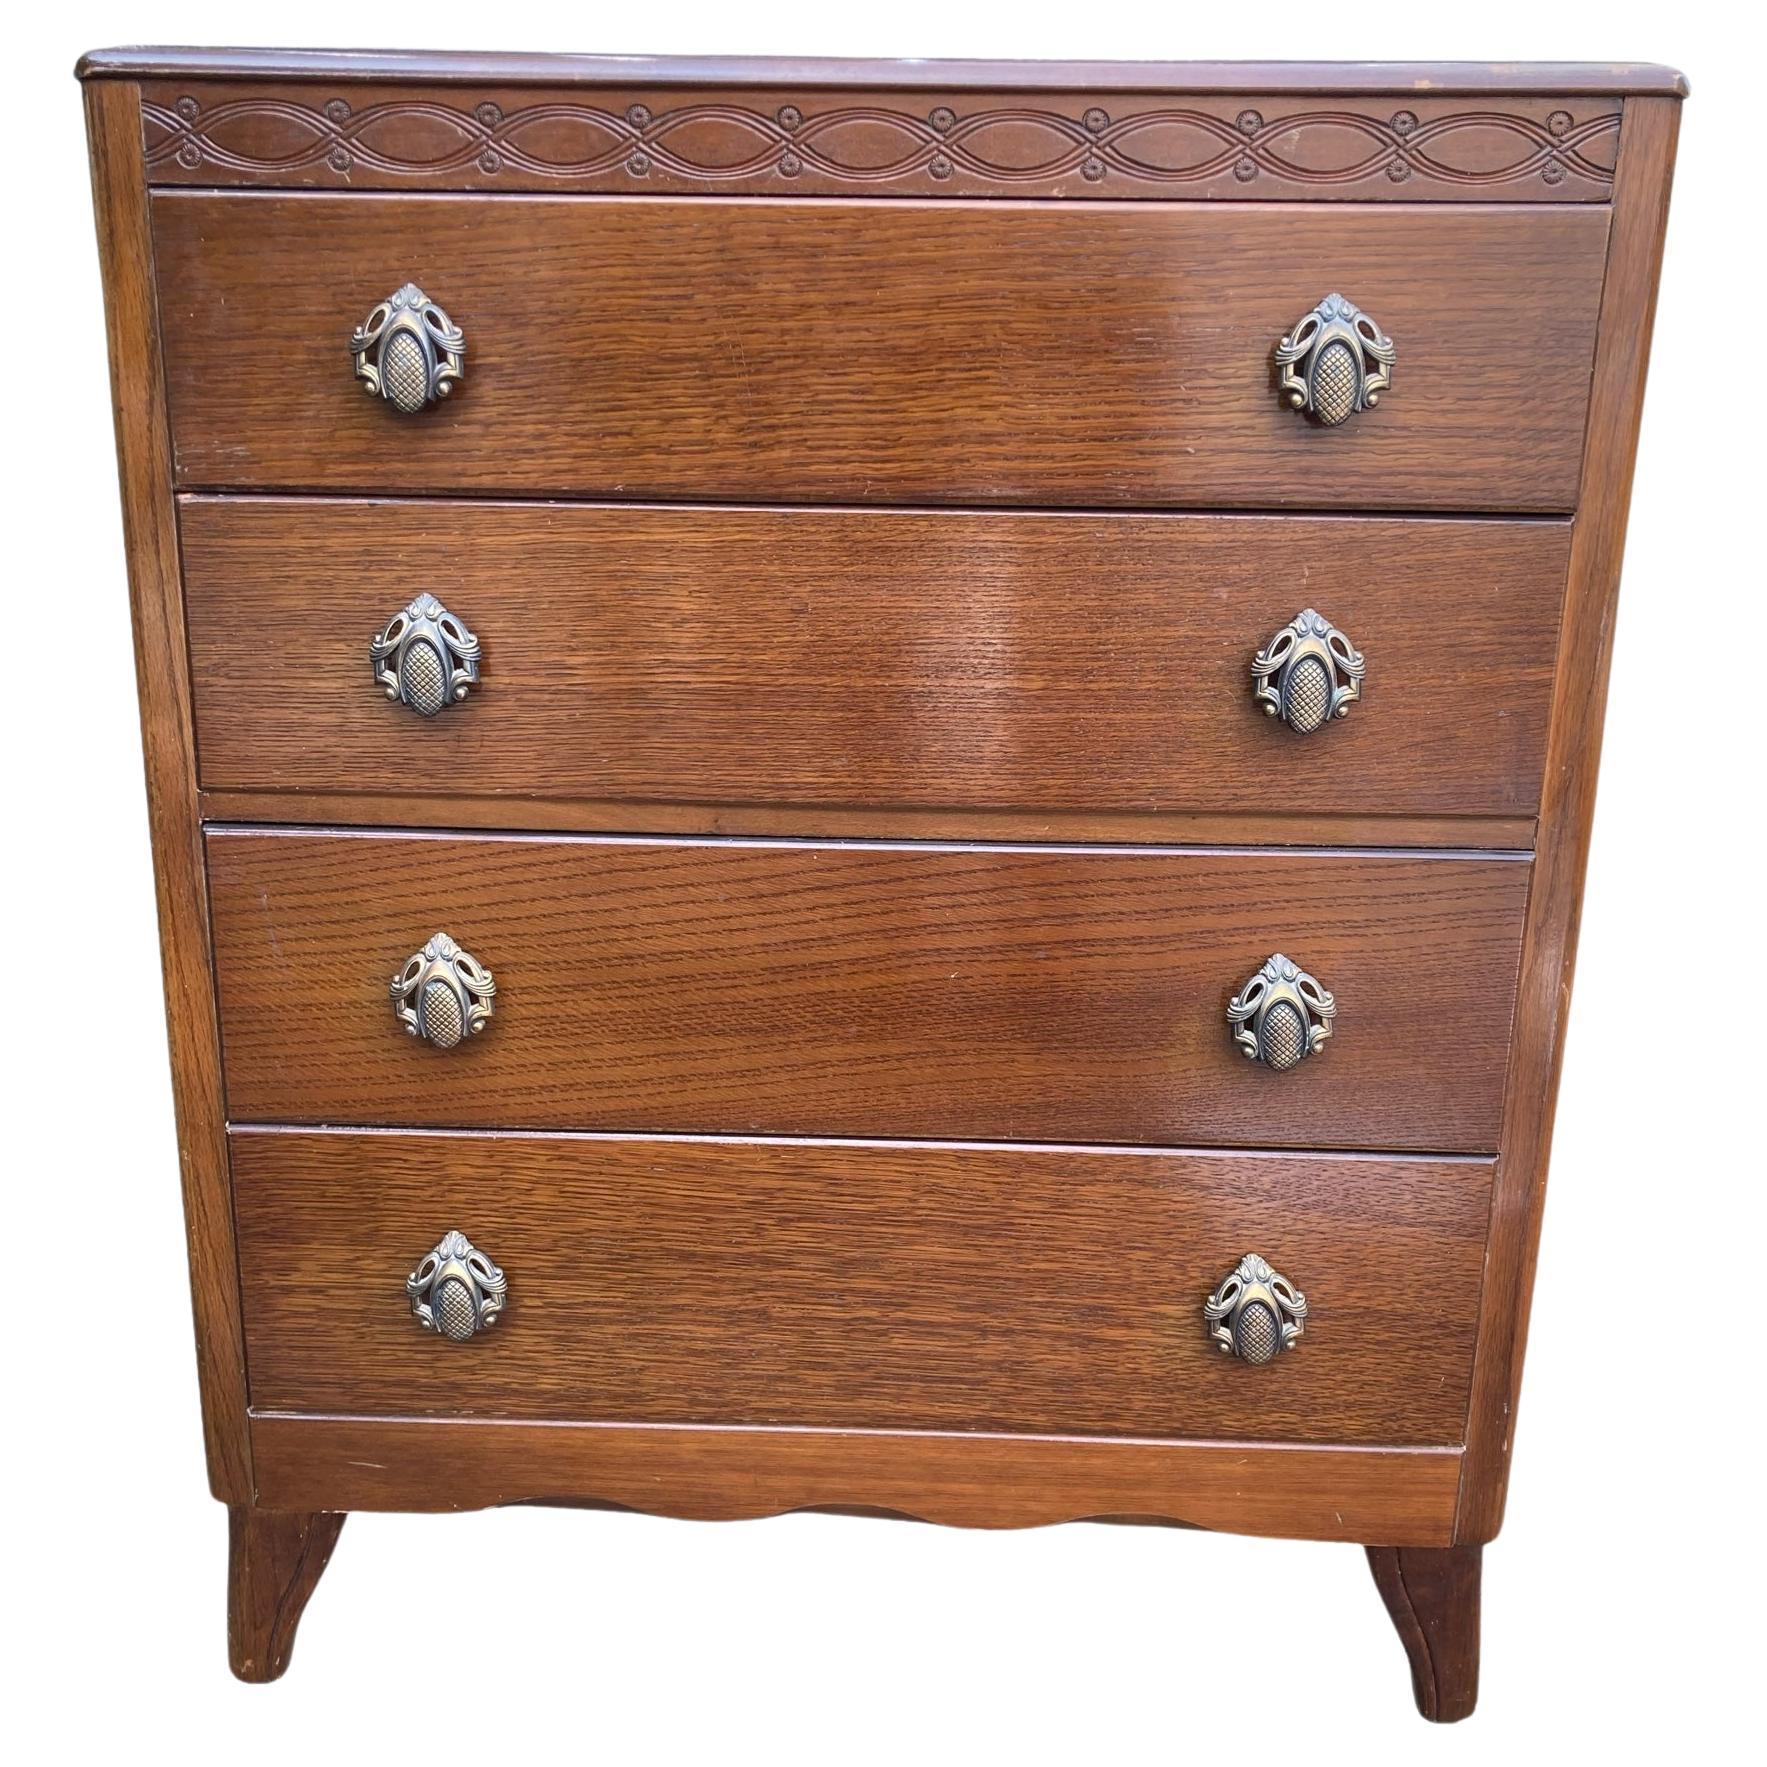 A Mid Century Harris Lebus Style Chest of Drawers Art Deco style handles. For Sale